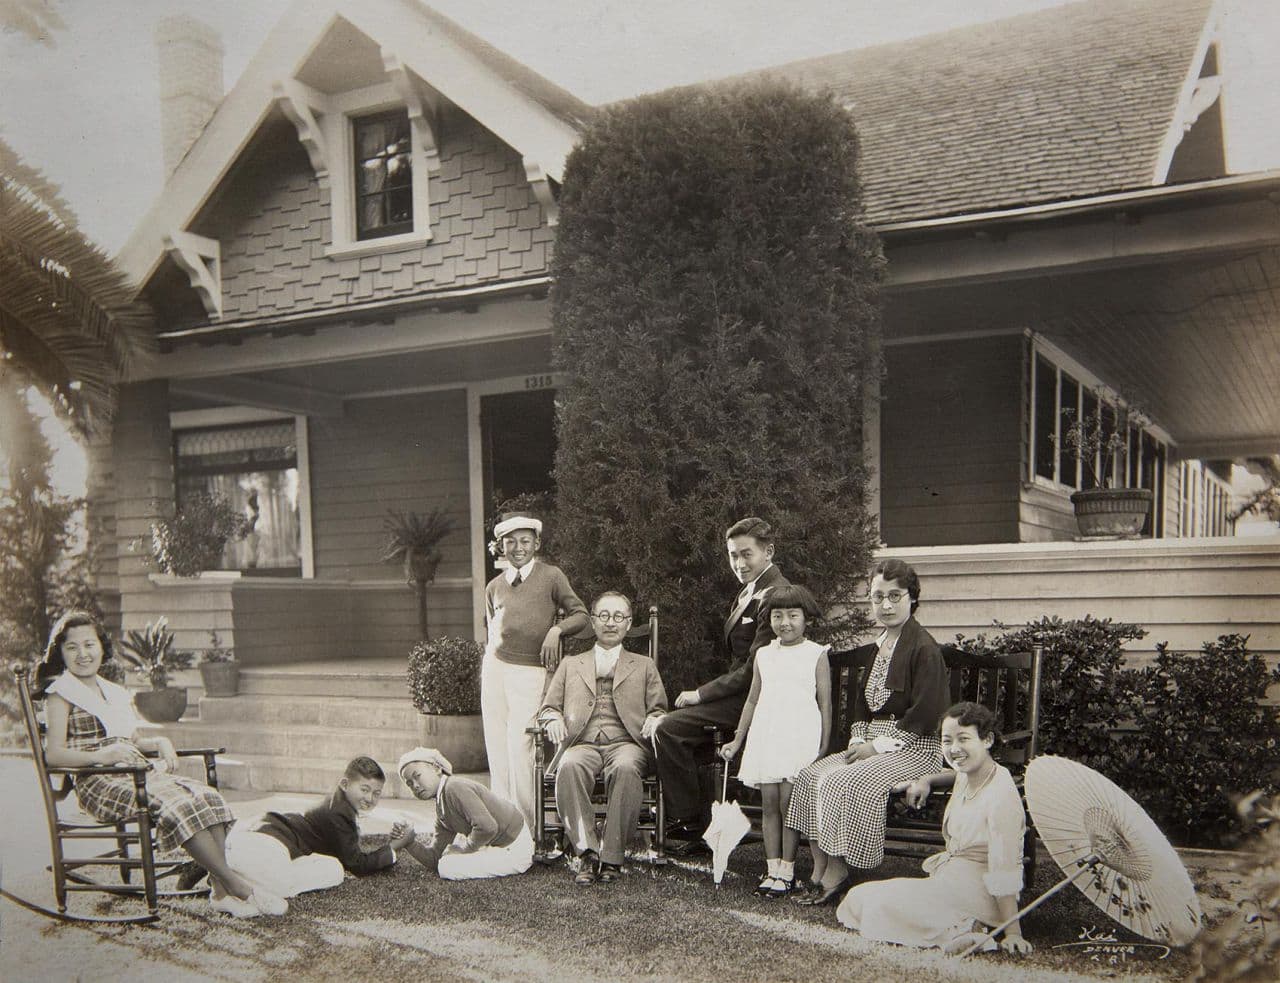 The Akimoto family at their home on 36th St. in Los Angeles in July, 1933. (Courtesy of the Akimoto family.)